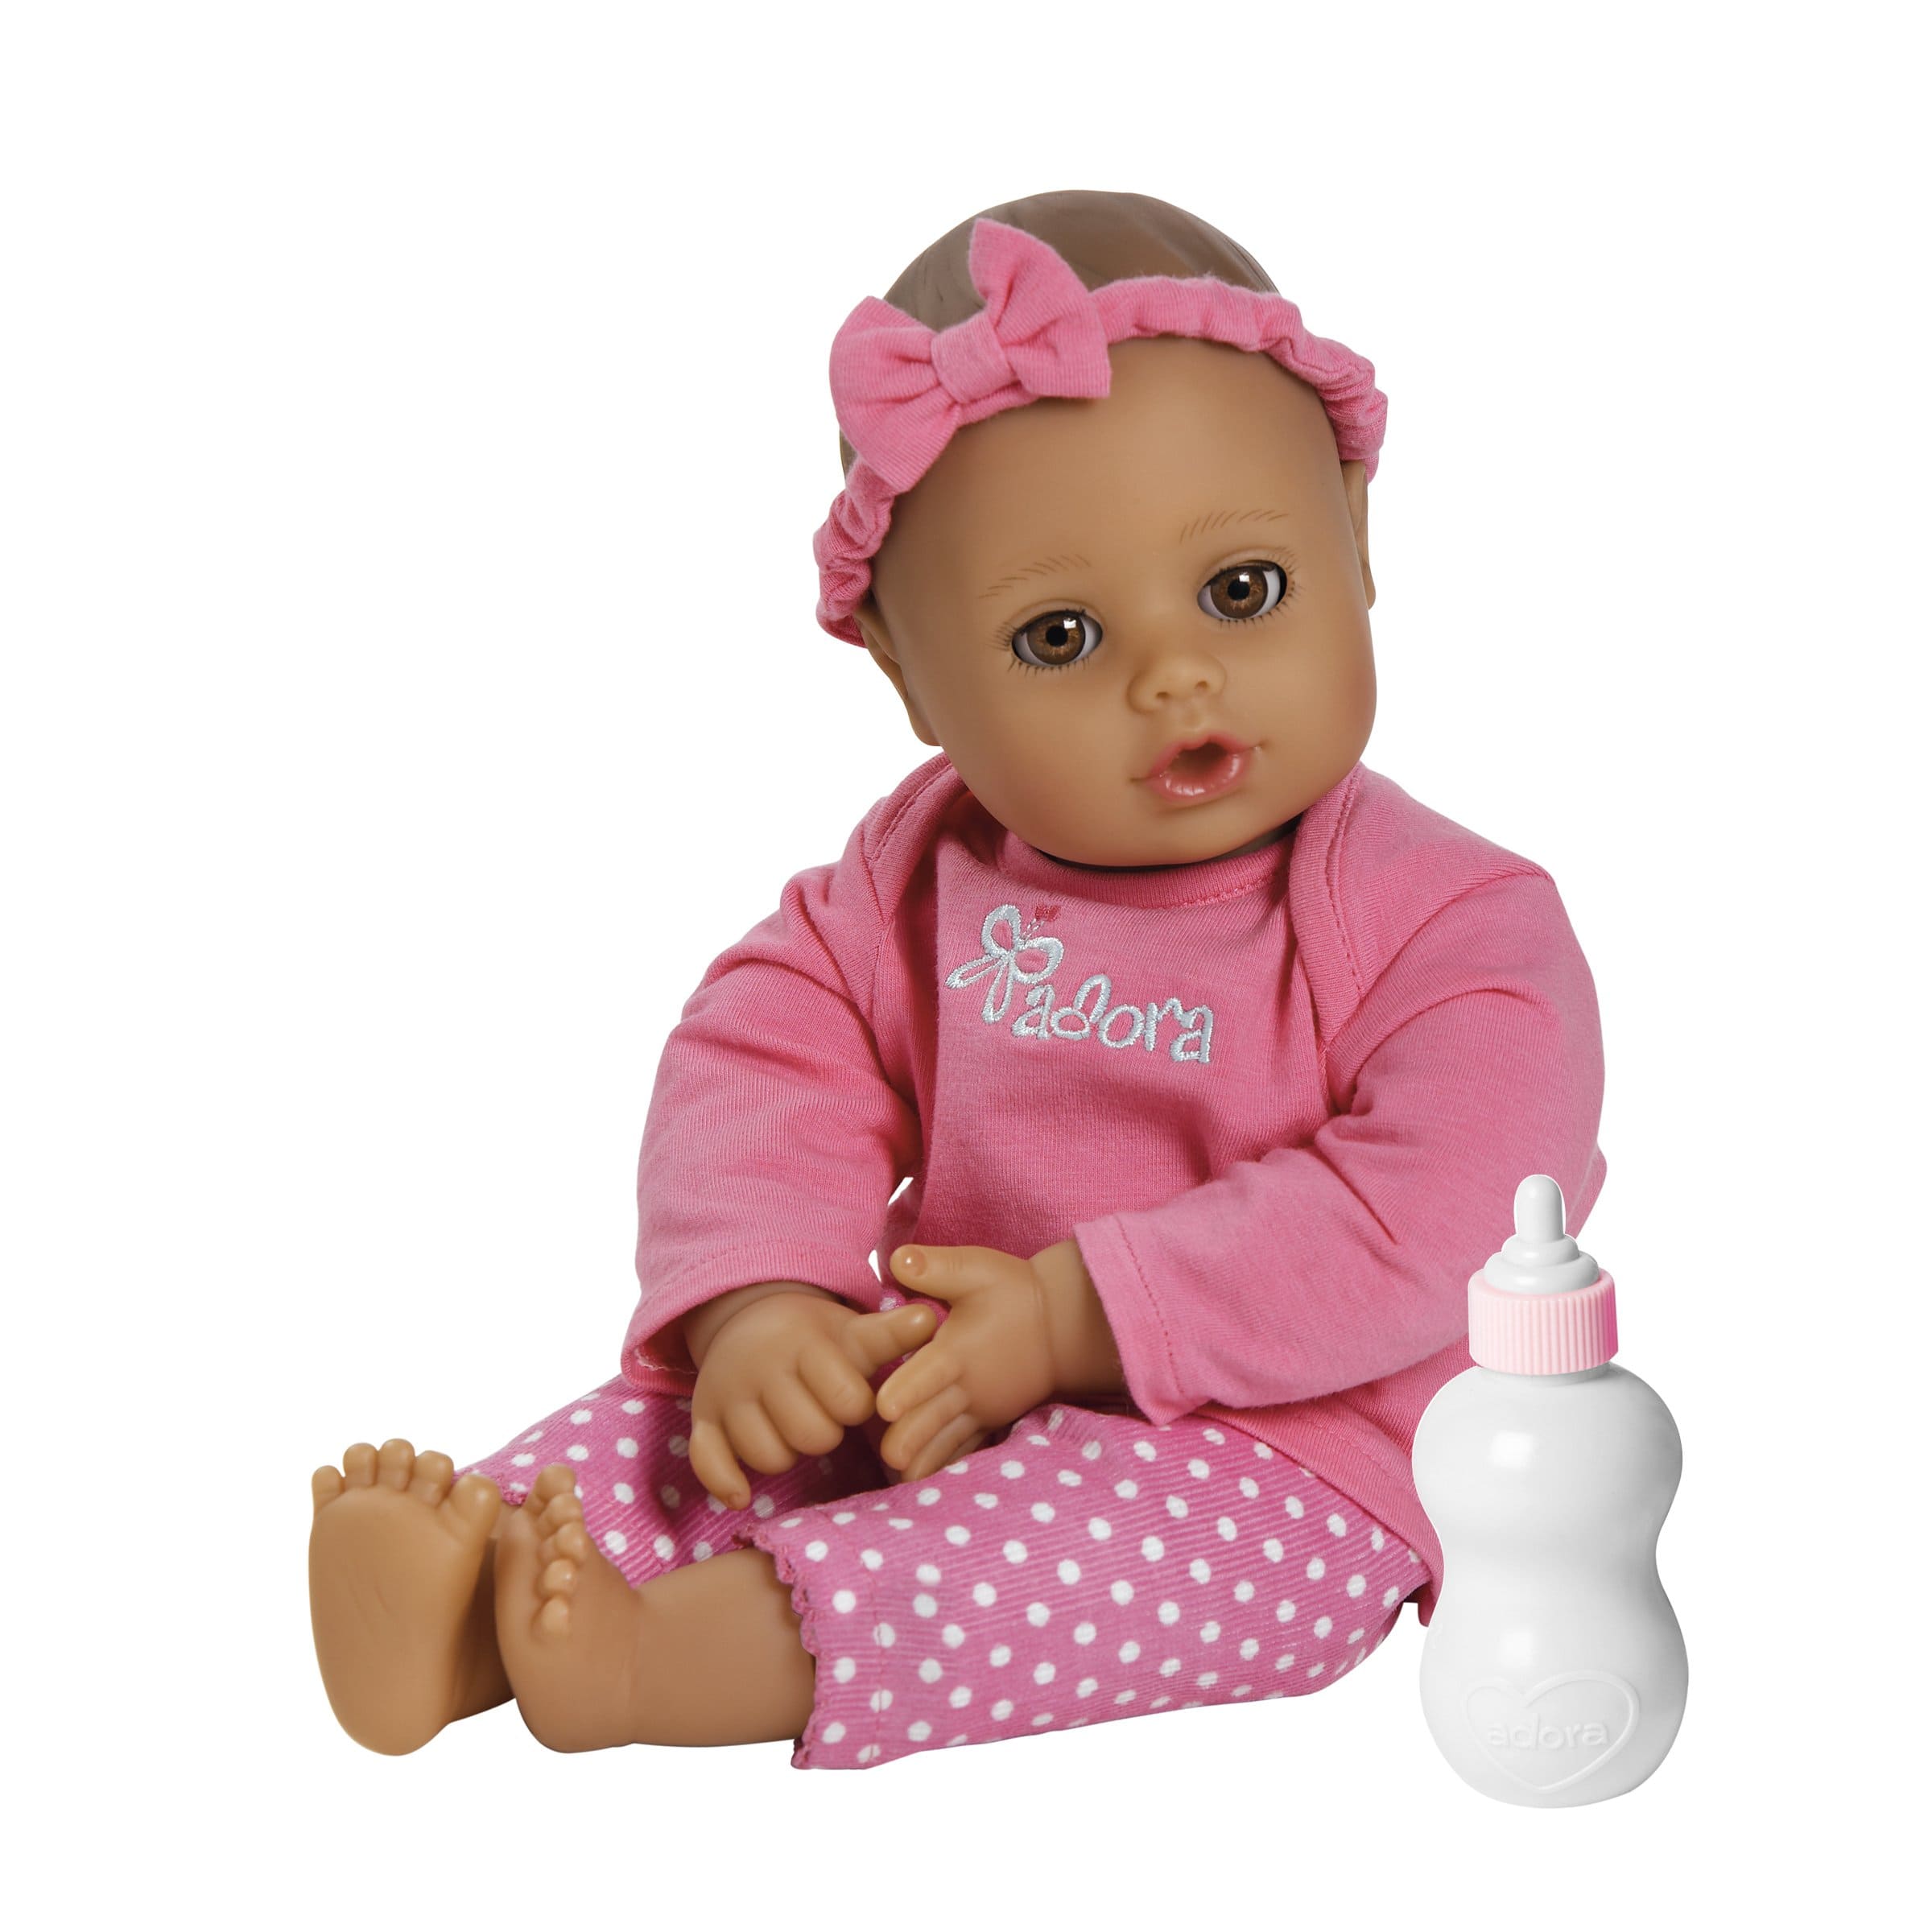 Adora Baby Baby Toy for 1 Year Old Girls